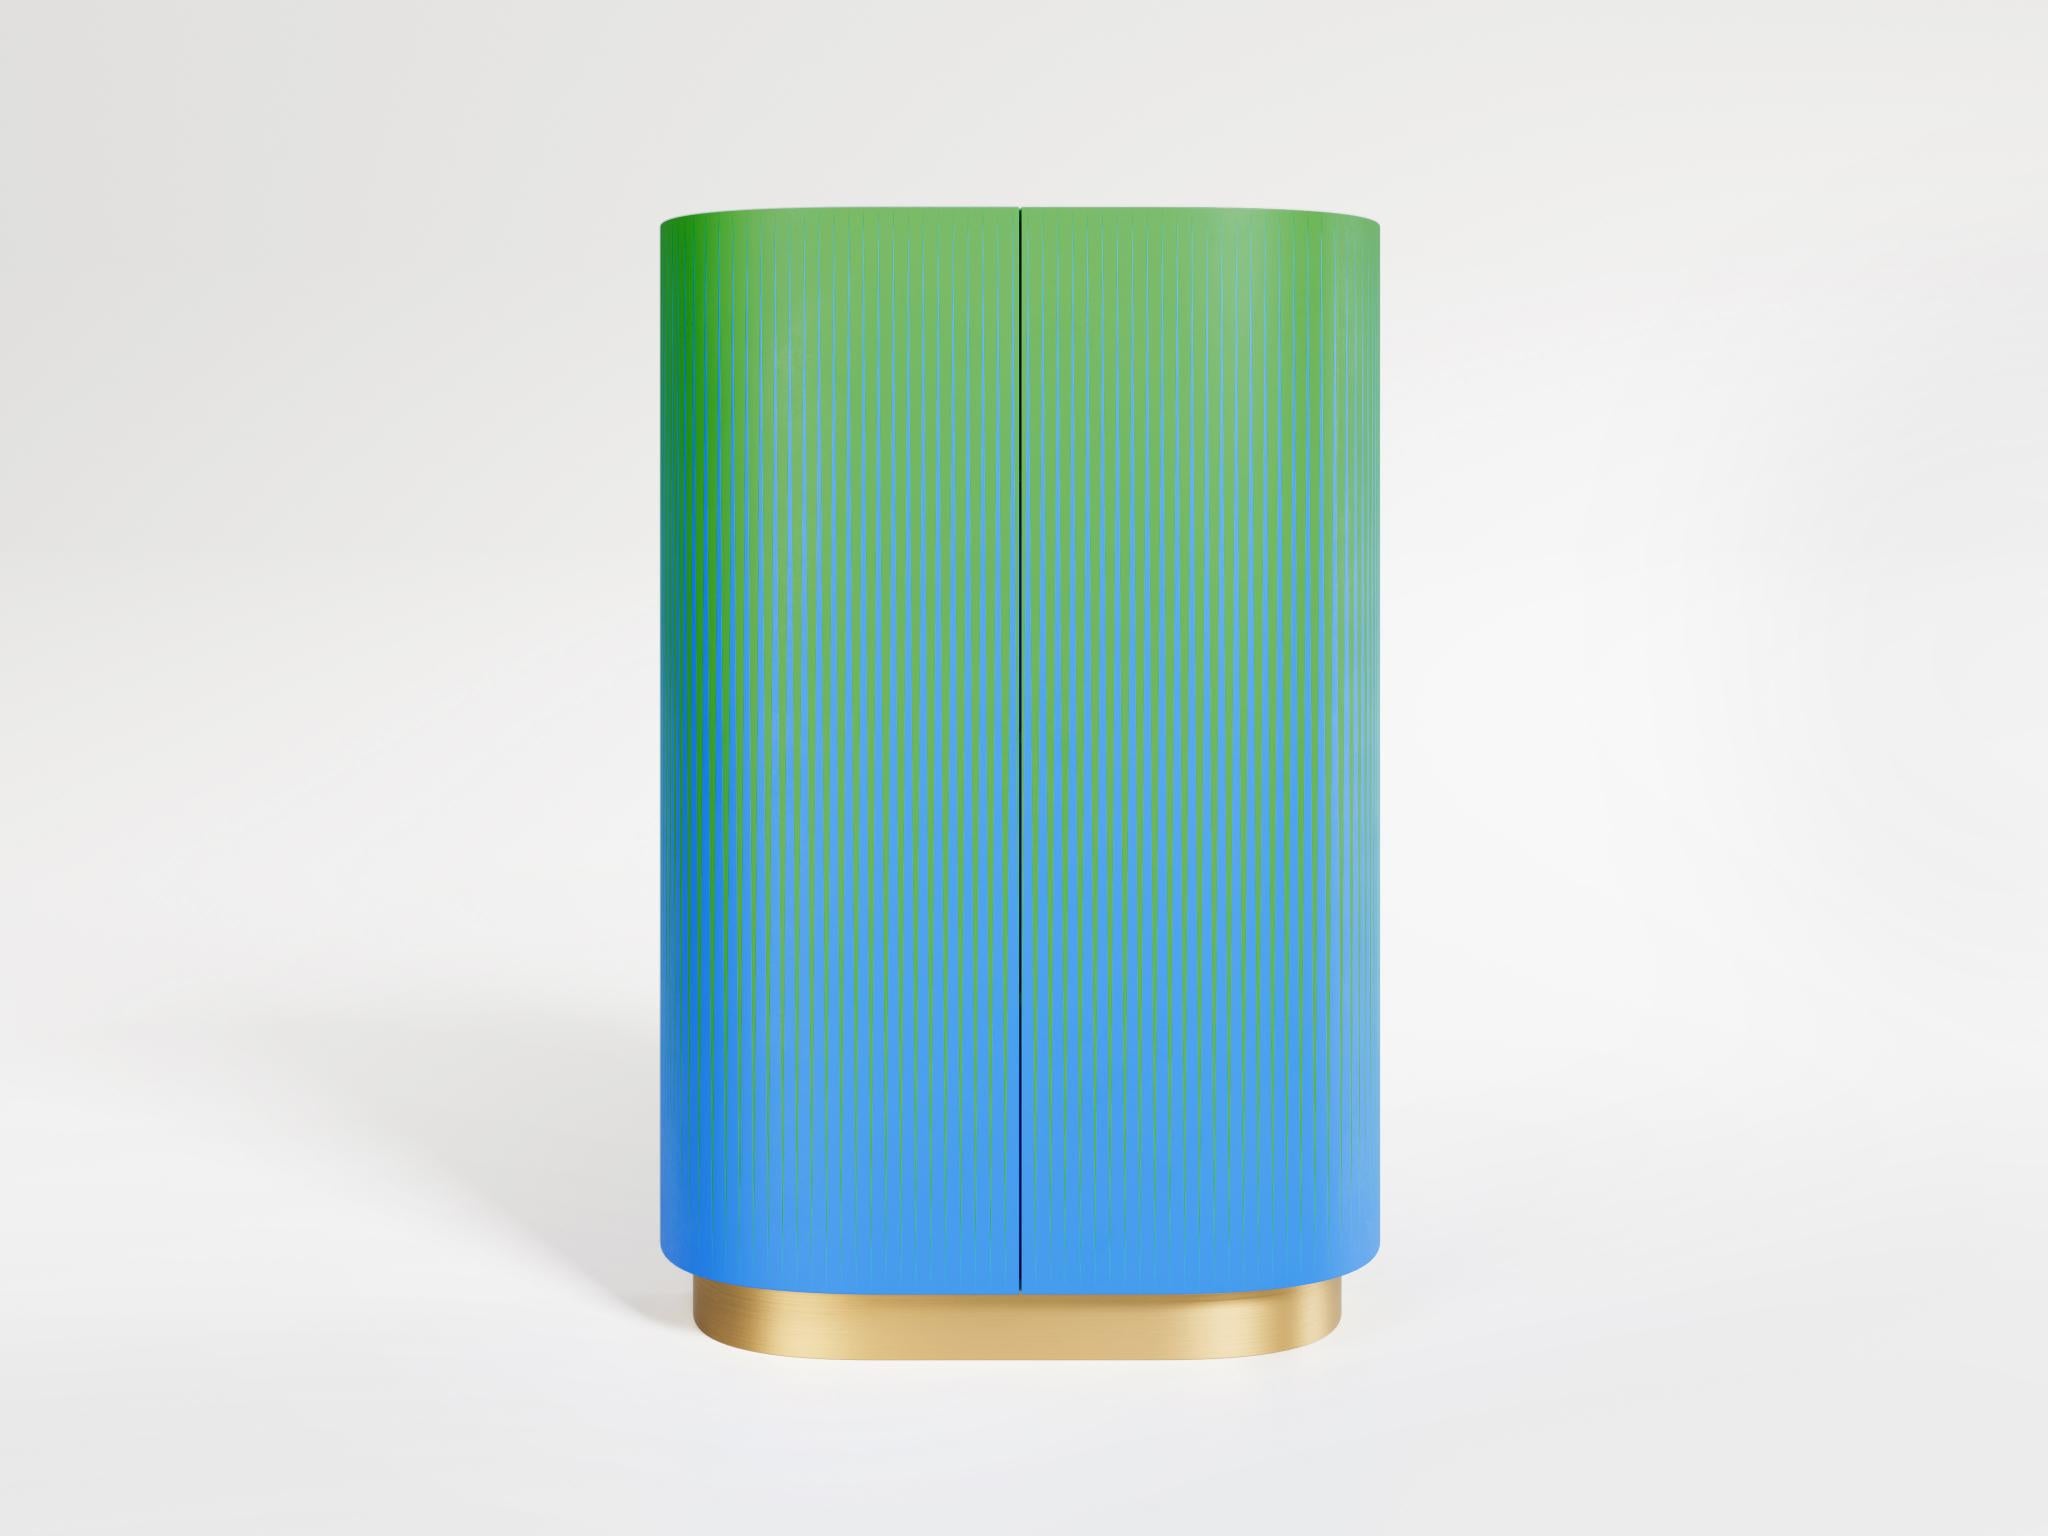 Opticabinet by Lisa Brustolin
Dimensions: W 124 x D 35 x H 184 cm
Materials: Wood, Brass.

Handcrafted in Italy by masters of Venetian craftmenship, this cabinet is an extensive research on the interaction of colors, which is here applied to the